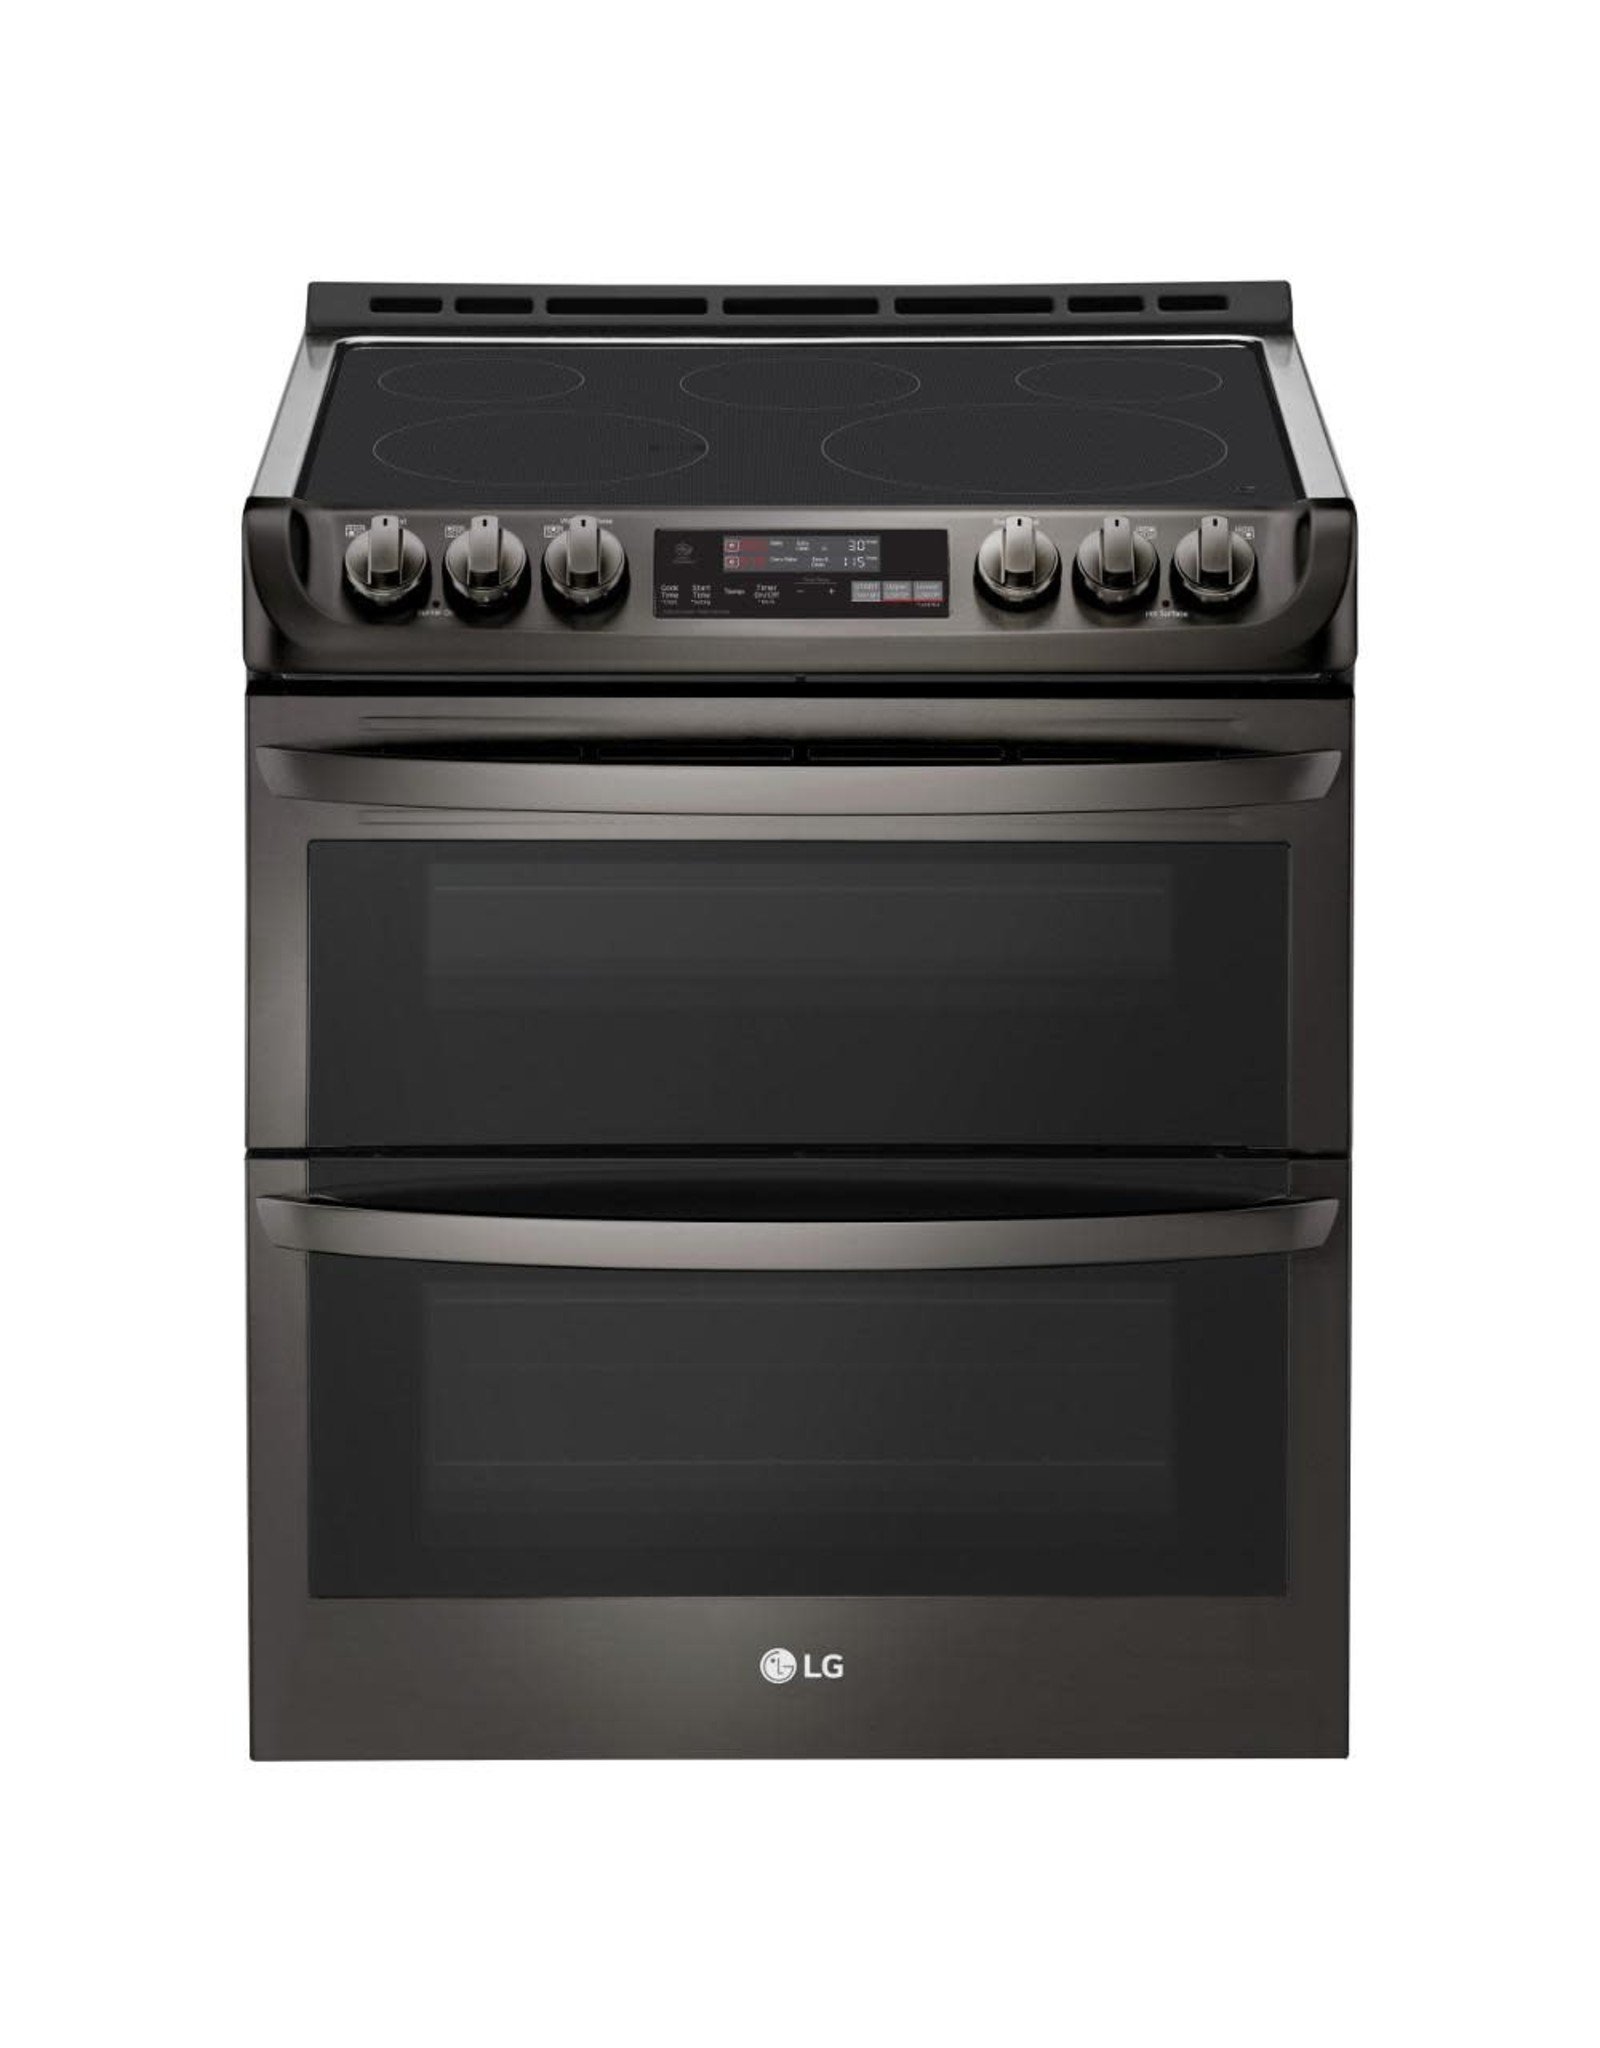 LG Electronics LTE4815BD 7.3 cu. ft. Smart Double Oven Electric Range, Self-Cleaning, Convection and Wi-Fi Enabled in Black Stainless Steel